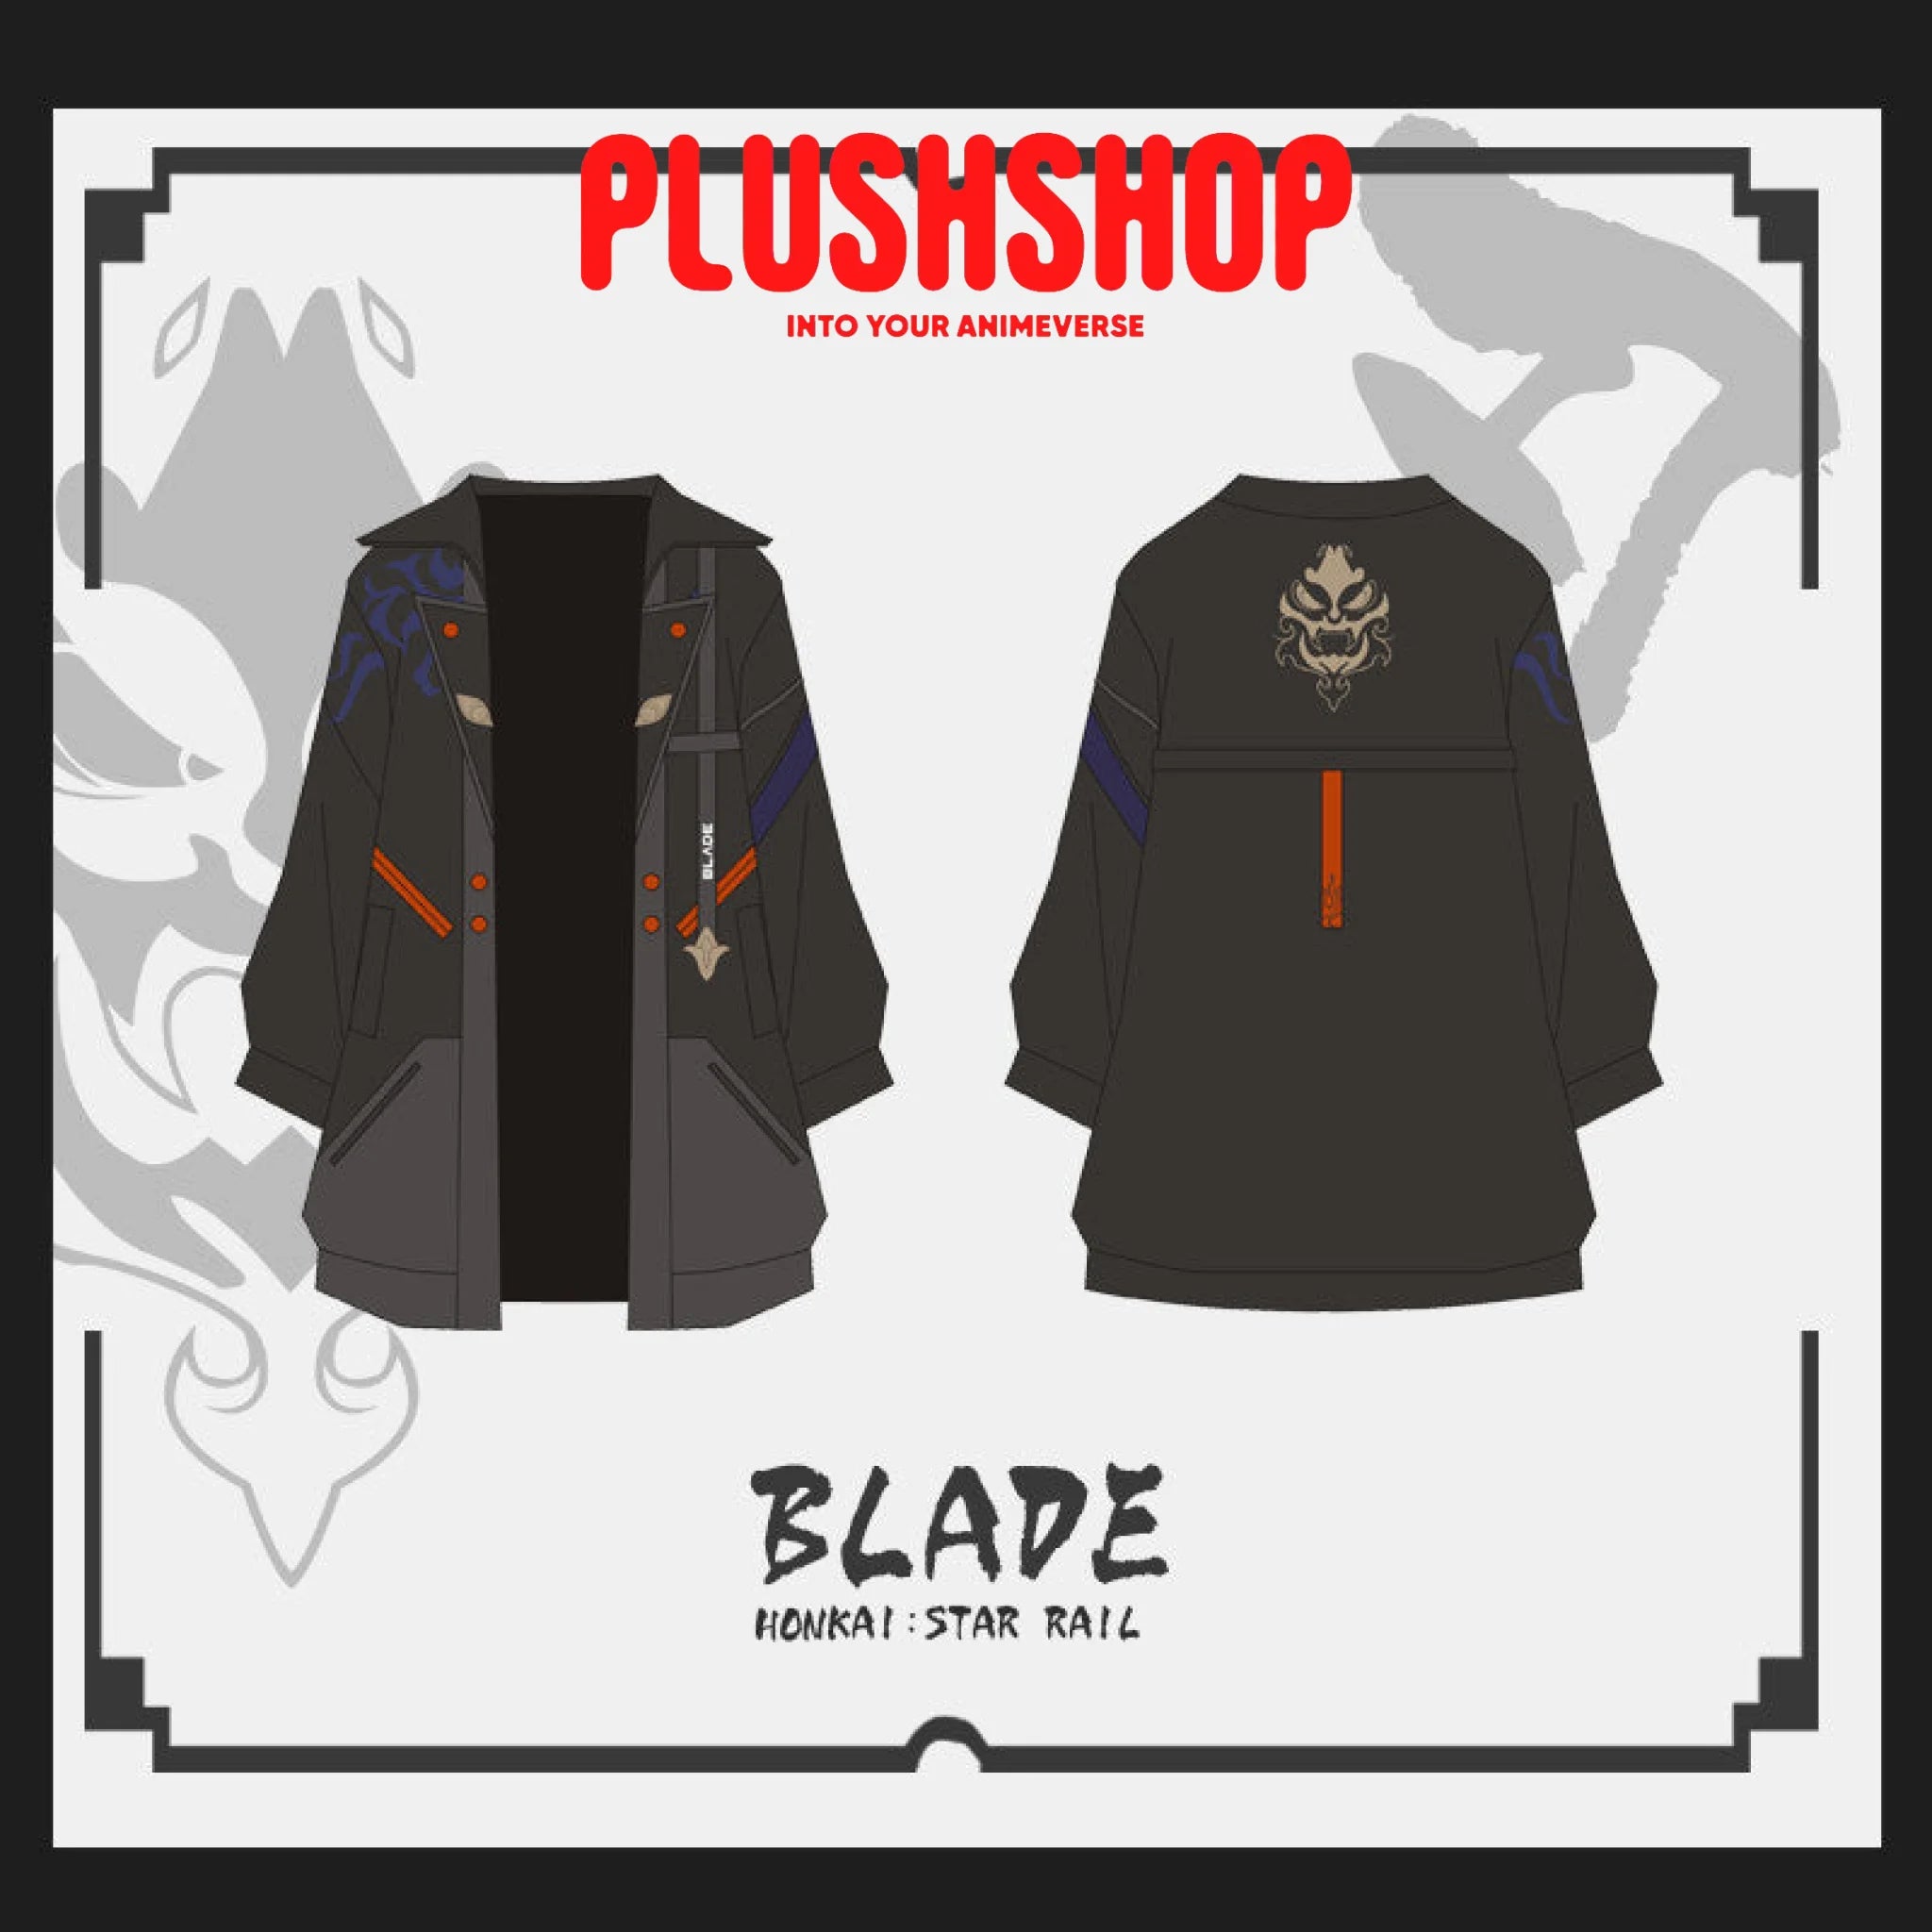 Honkai Starrail Game Character Blade Design Element Cosplay Outfit Jacket Sweater Pants 服装